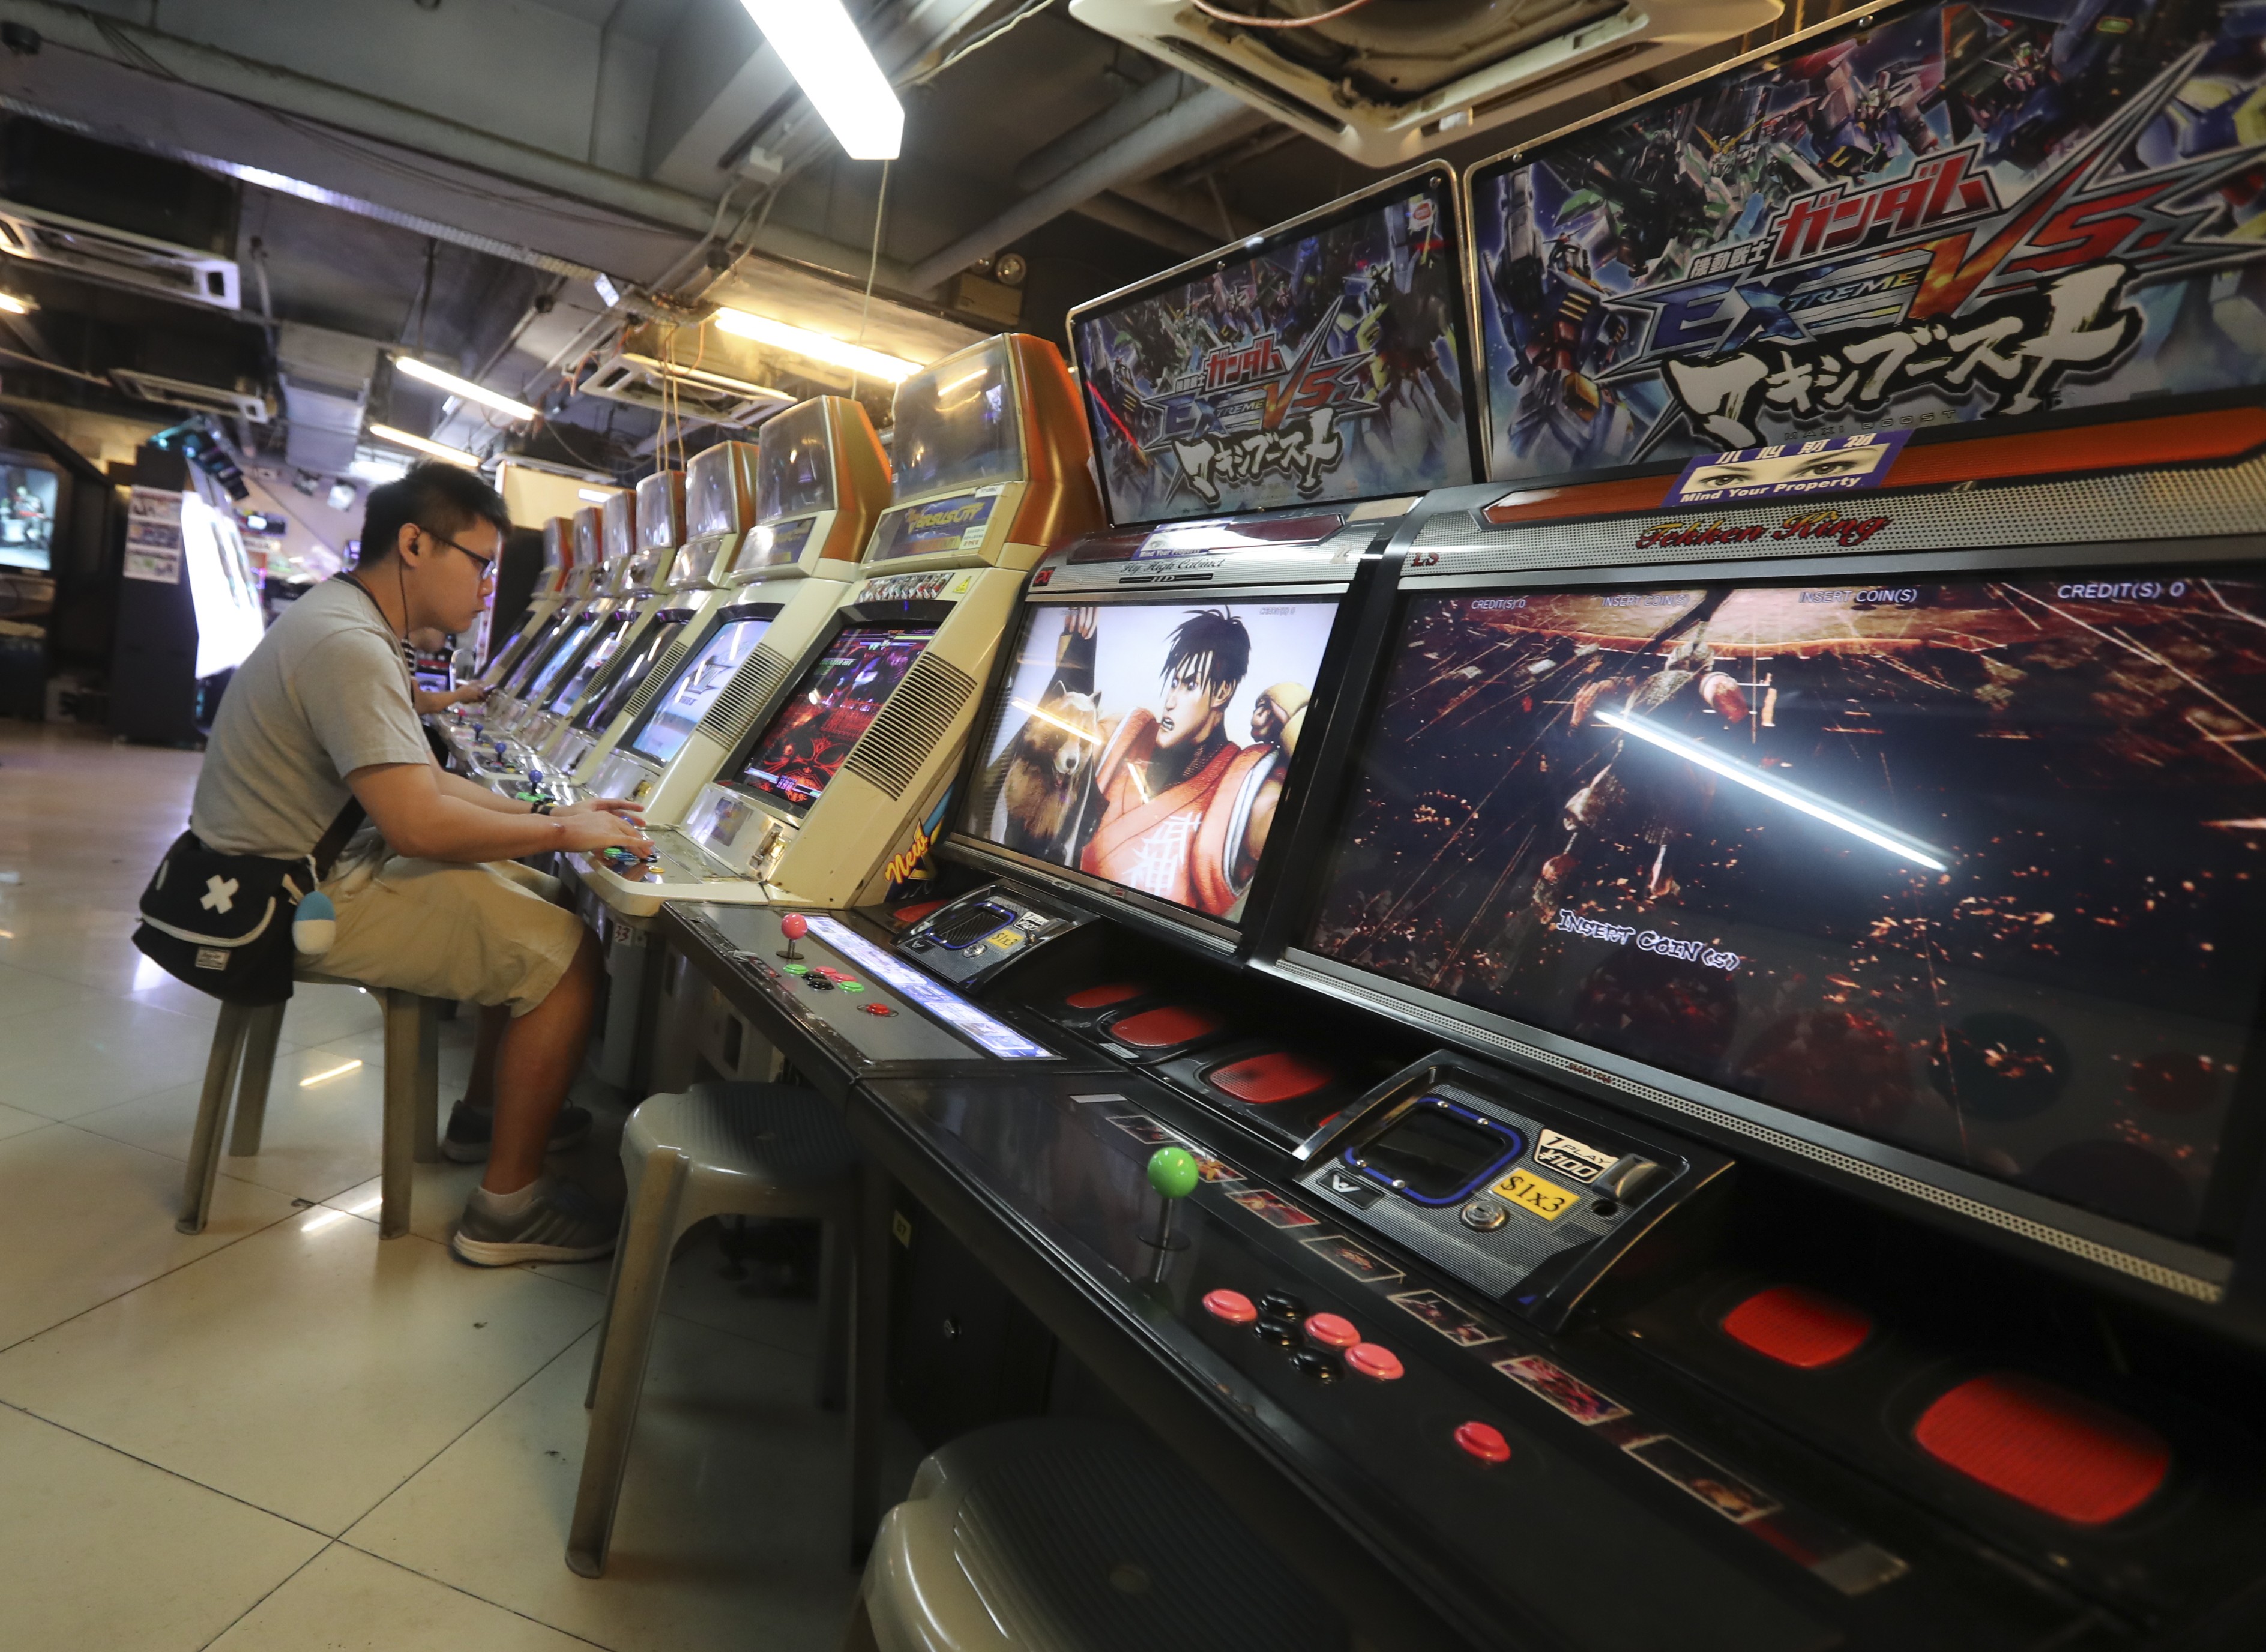 The neon-lit Gamezone in Mong Kok is typical of the old-school video arcade. Photo: Edward Wong